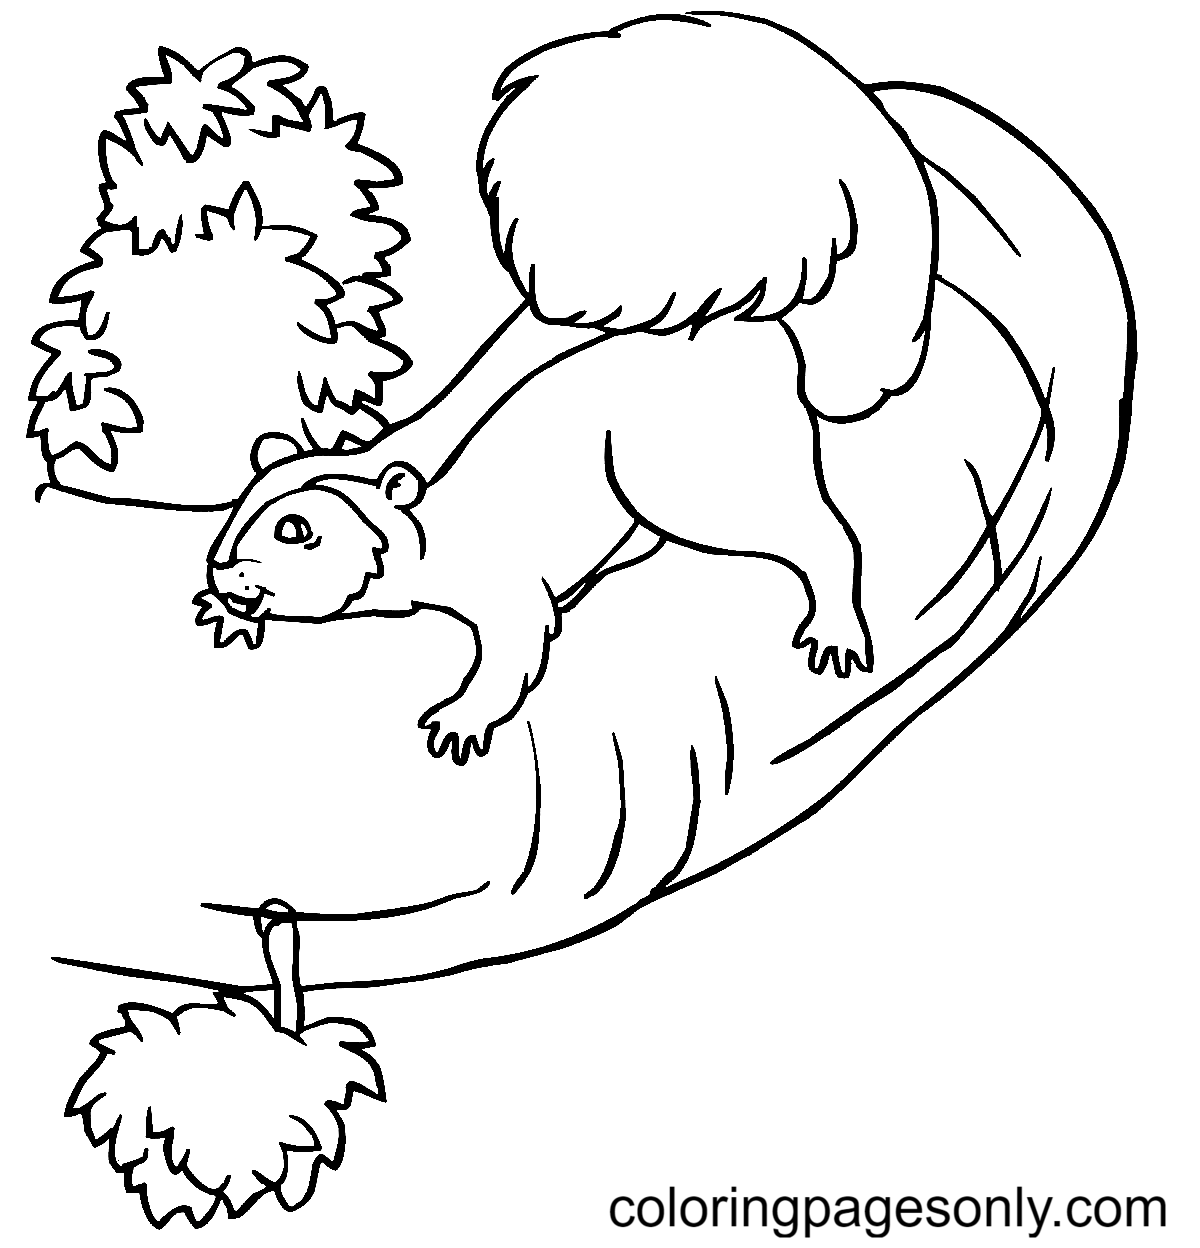 Squirrel on a Tree Coloring Page